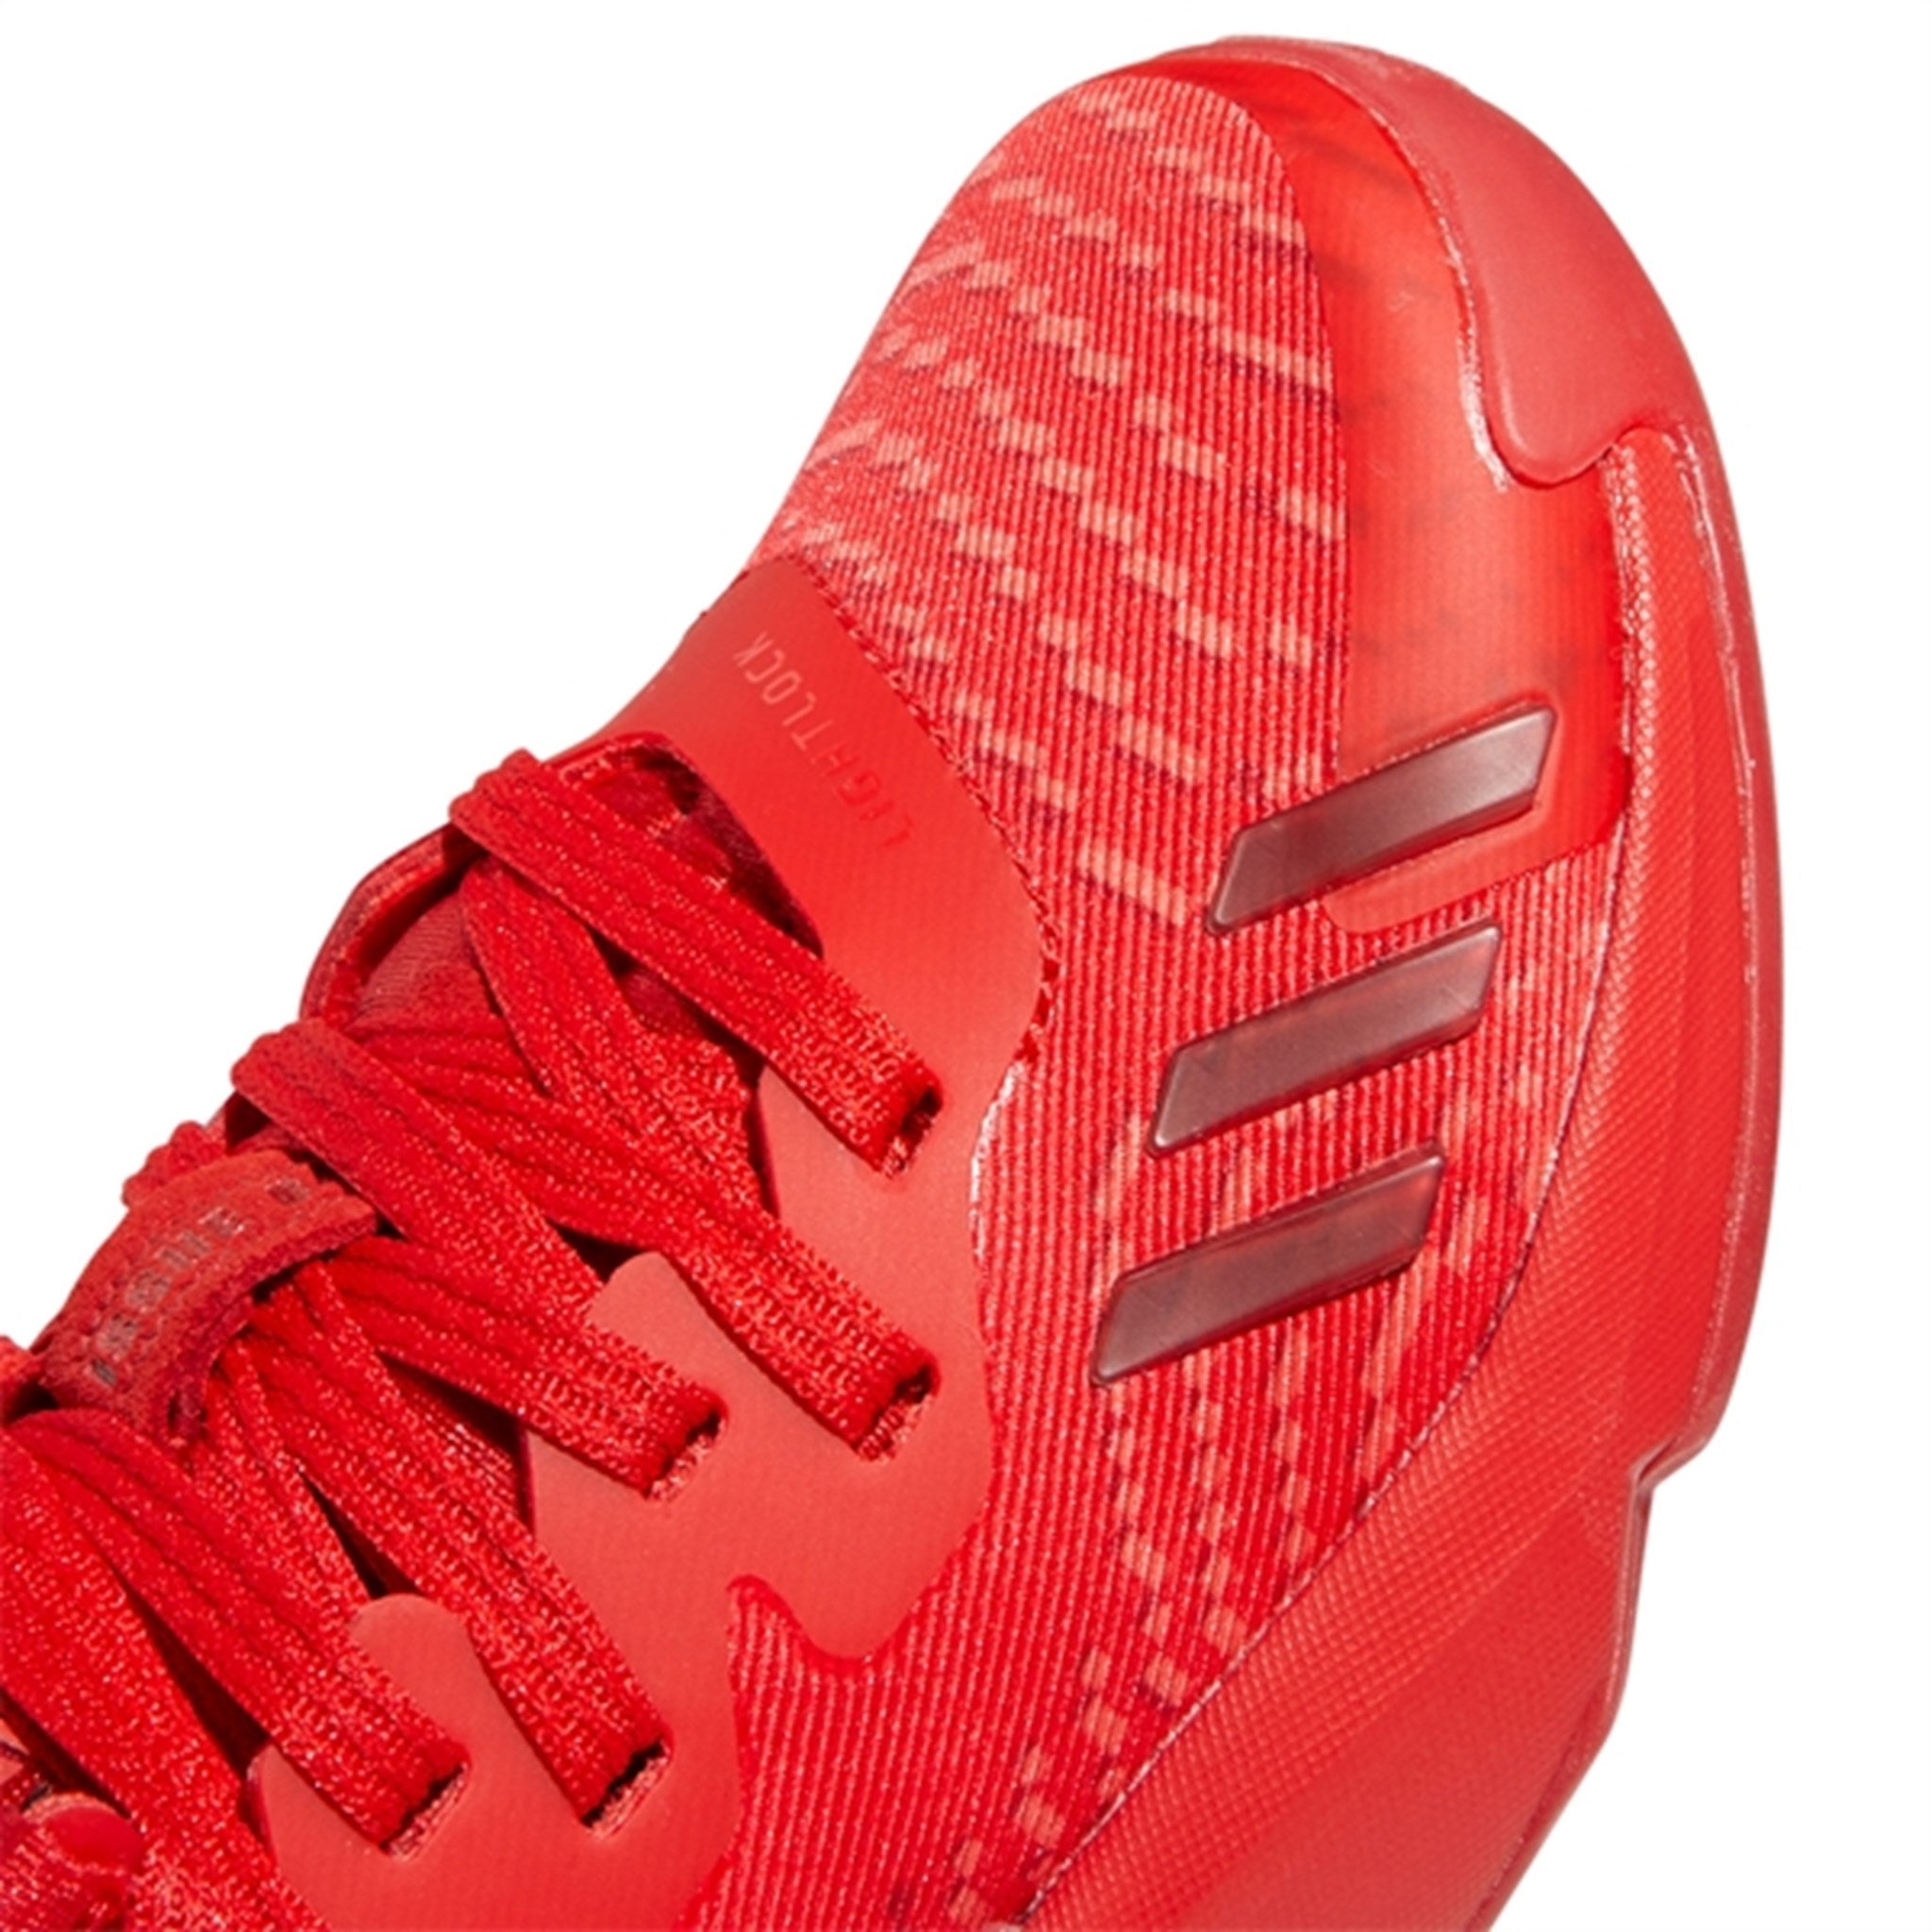 adidas D.O.N. Issue Sneakers Vivid Red 8